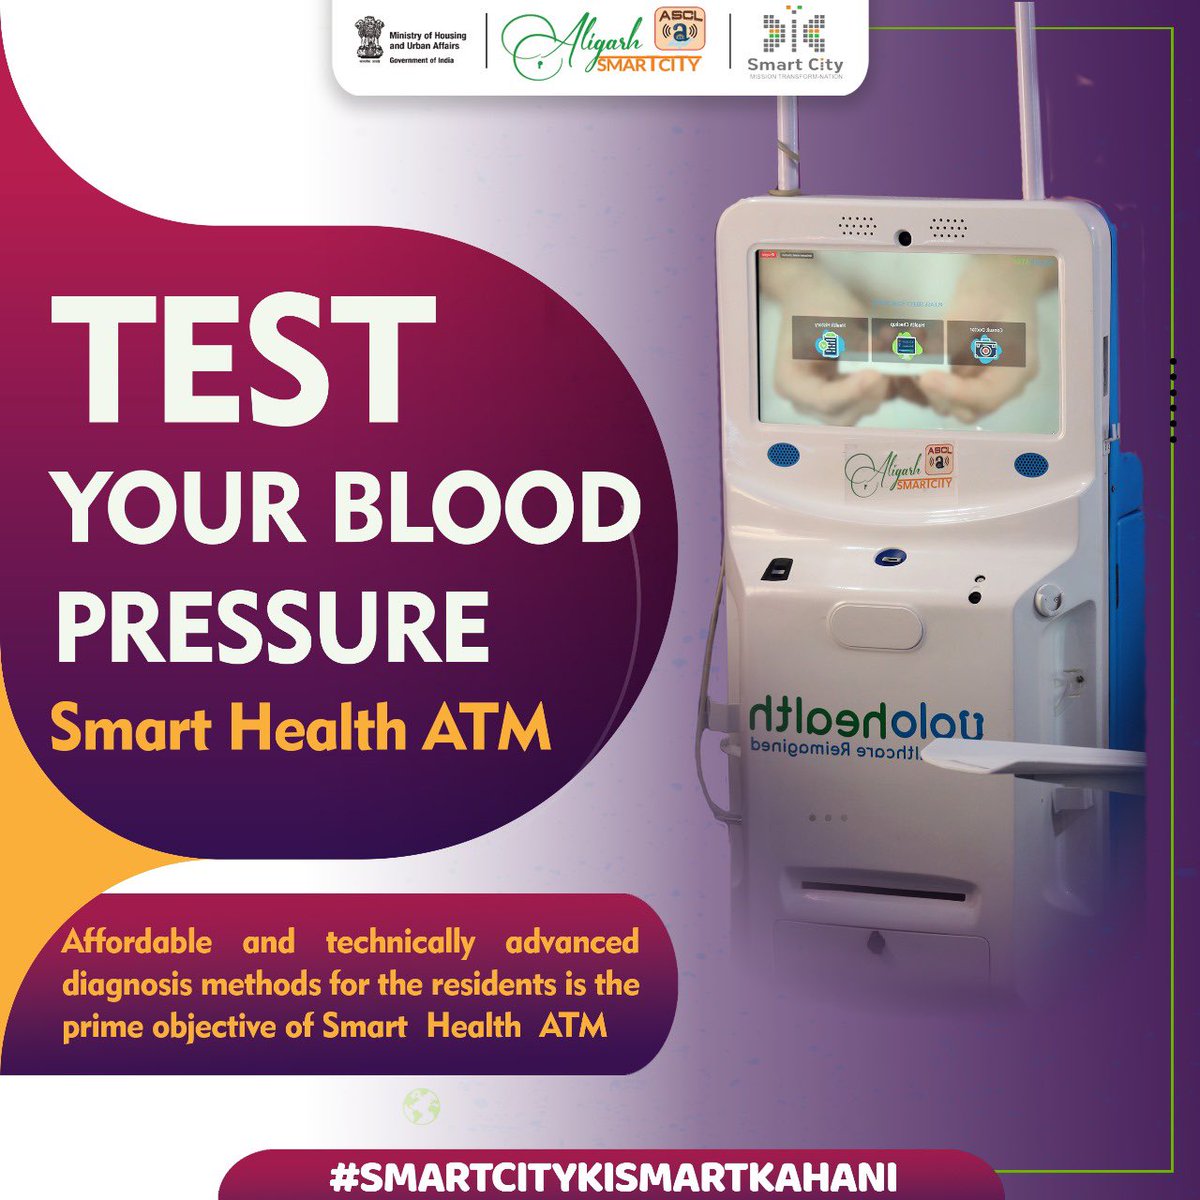 Prioritize your well-being! Step into the future of health check-ups at the Health ATM – where convenience meets care. Your journey to a healthier you begins here. 🌿 #HealthCheck #WellnessFirst #SmartCityKiSmartKahani #aligarhsmartcity #aligarh #smartcity #aligarh